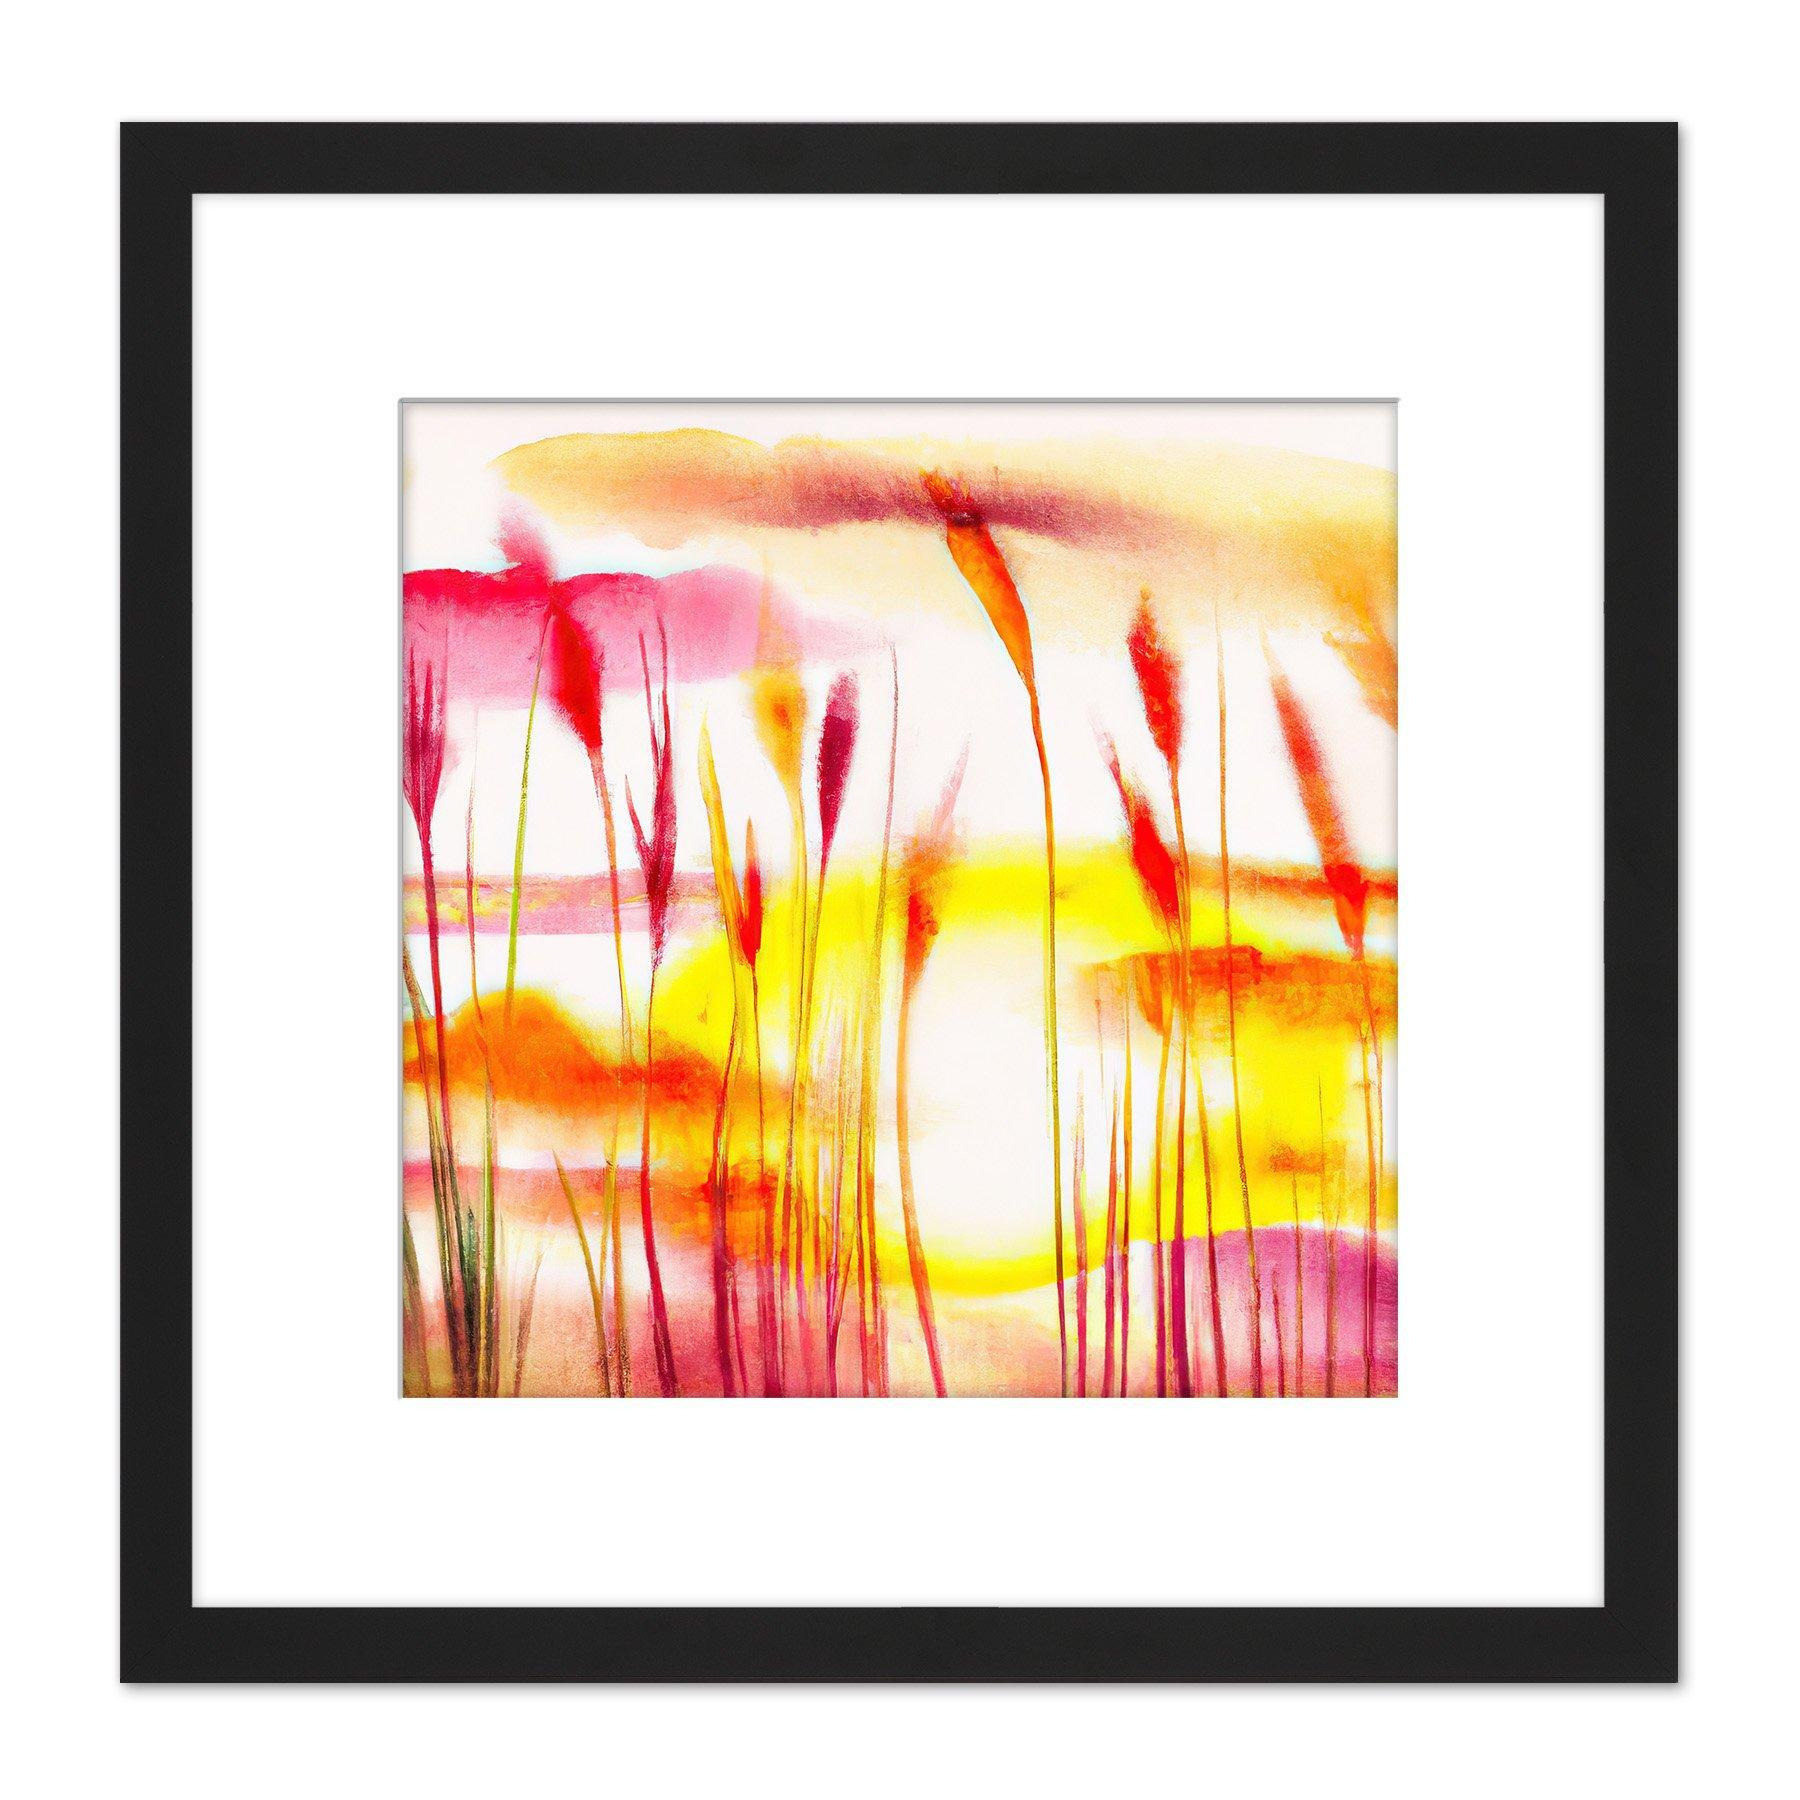 Abstract Wheat Field Nature Landscape Sunset Bright Watercolour Yellow Pink Red Orange Square Wooden Framed Wall Art Print Picture 8X8 Inch - image 1